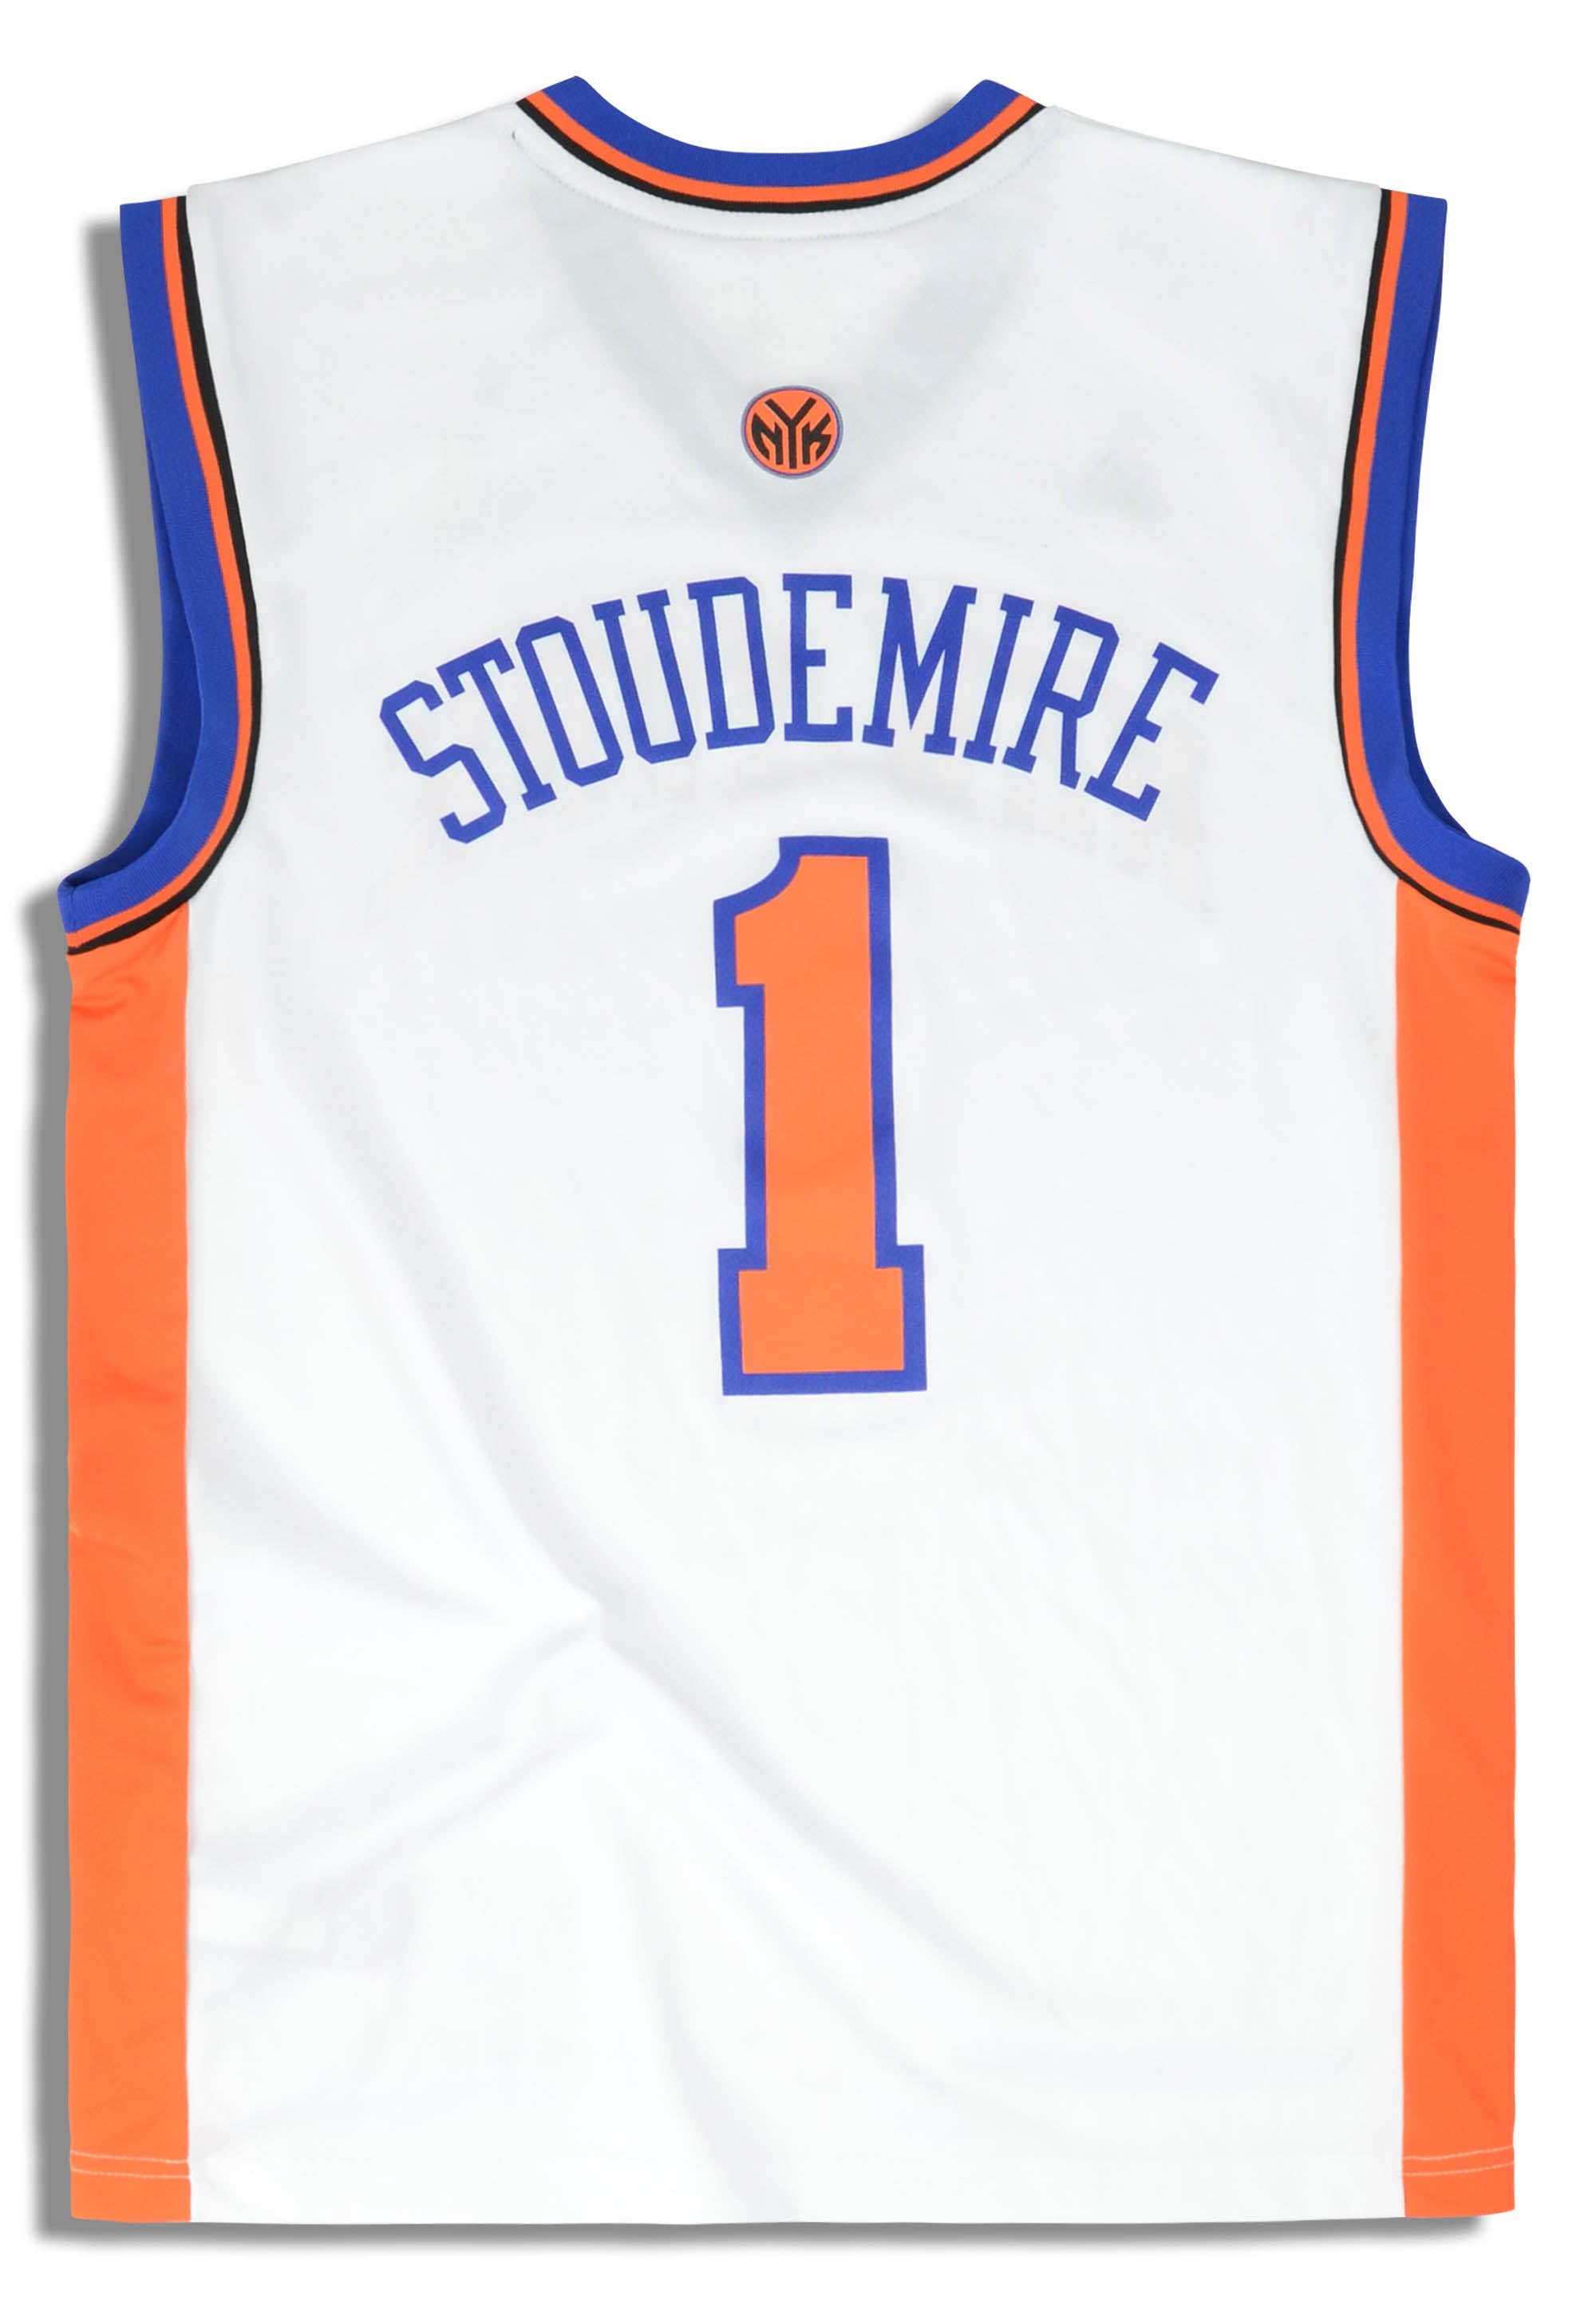 2010-12 NEW YORK KNICKS STOUDEMIRE #1 ADIDAS JERSEY (HOME) S